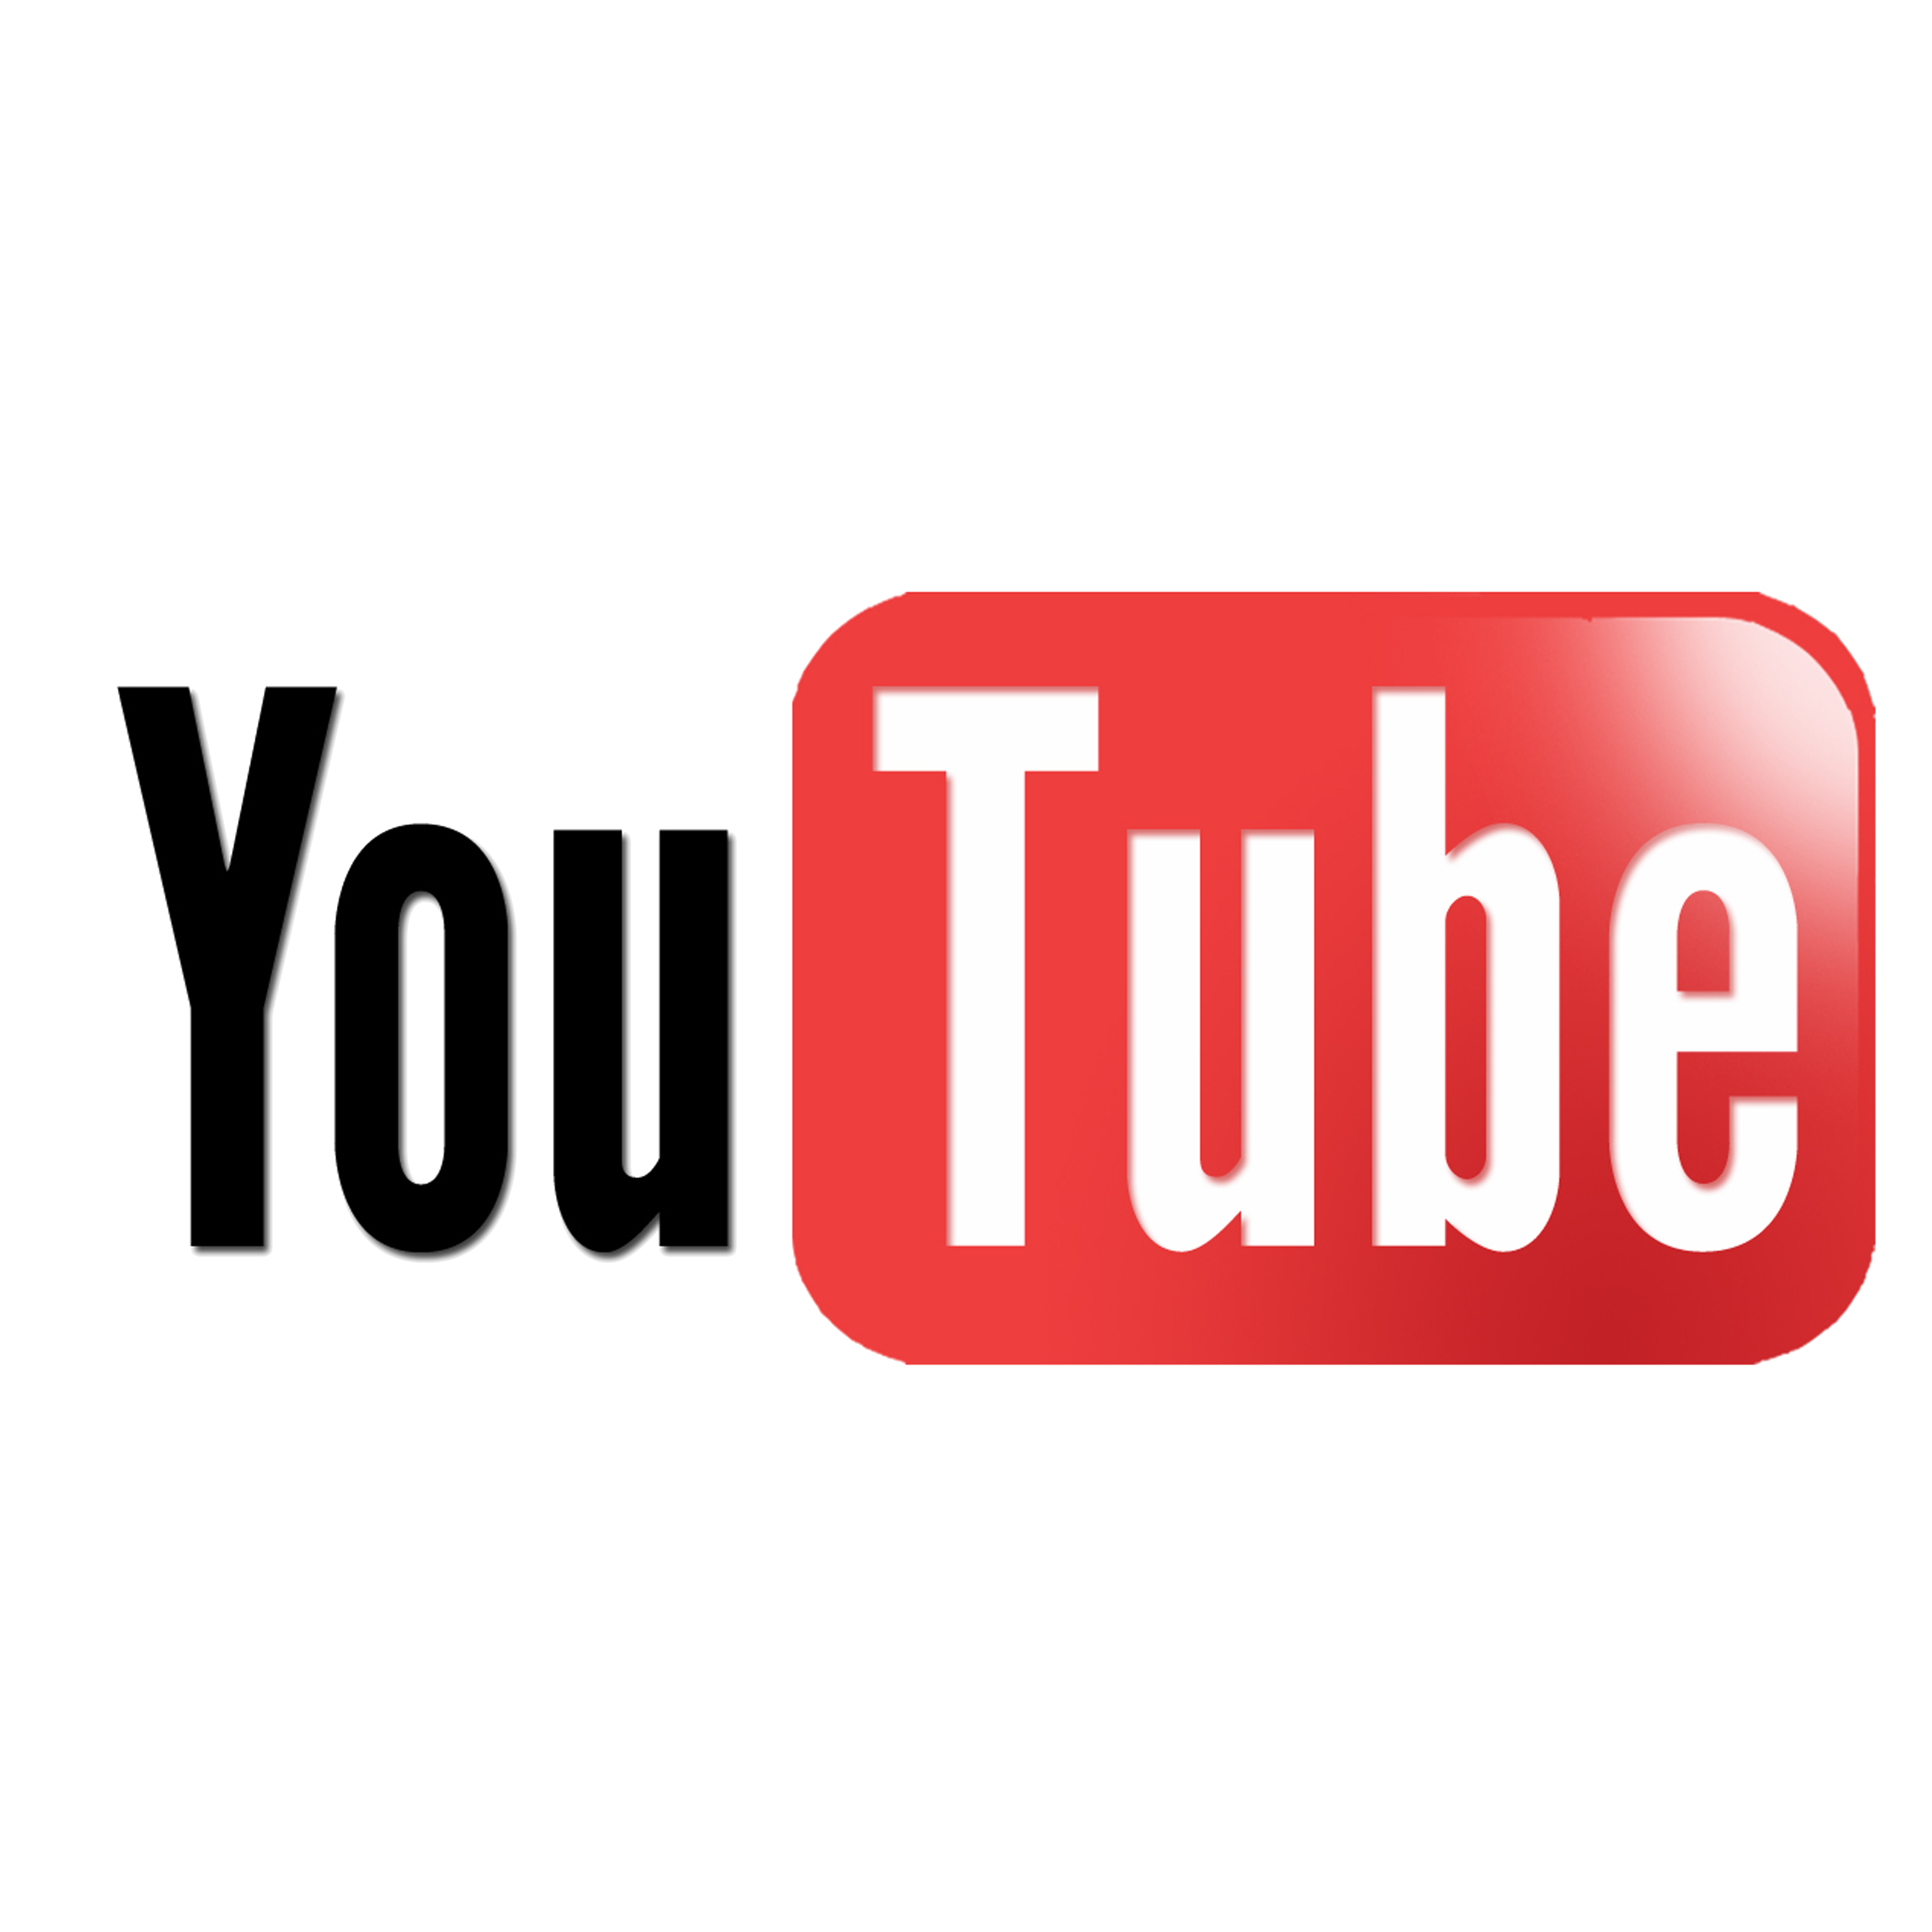 youtube-logo-png-2065.png